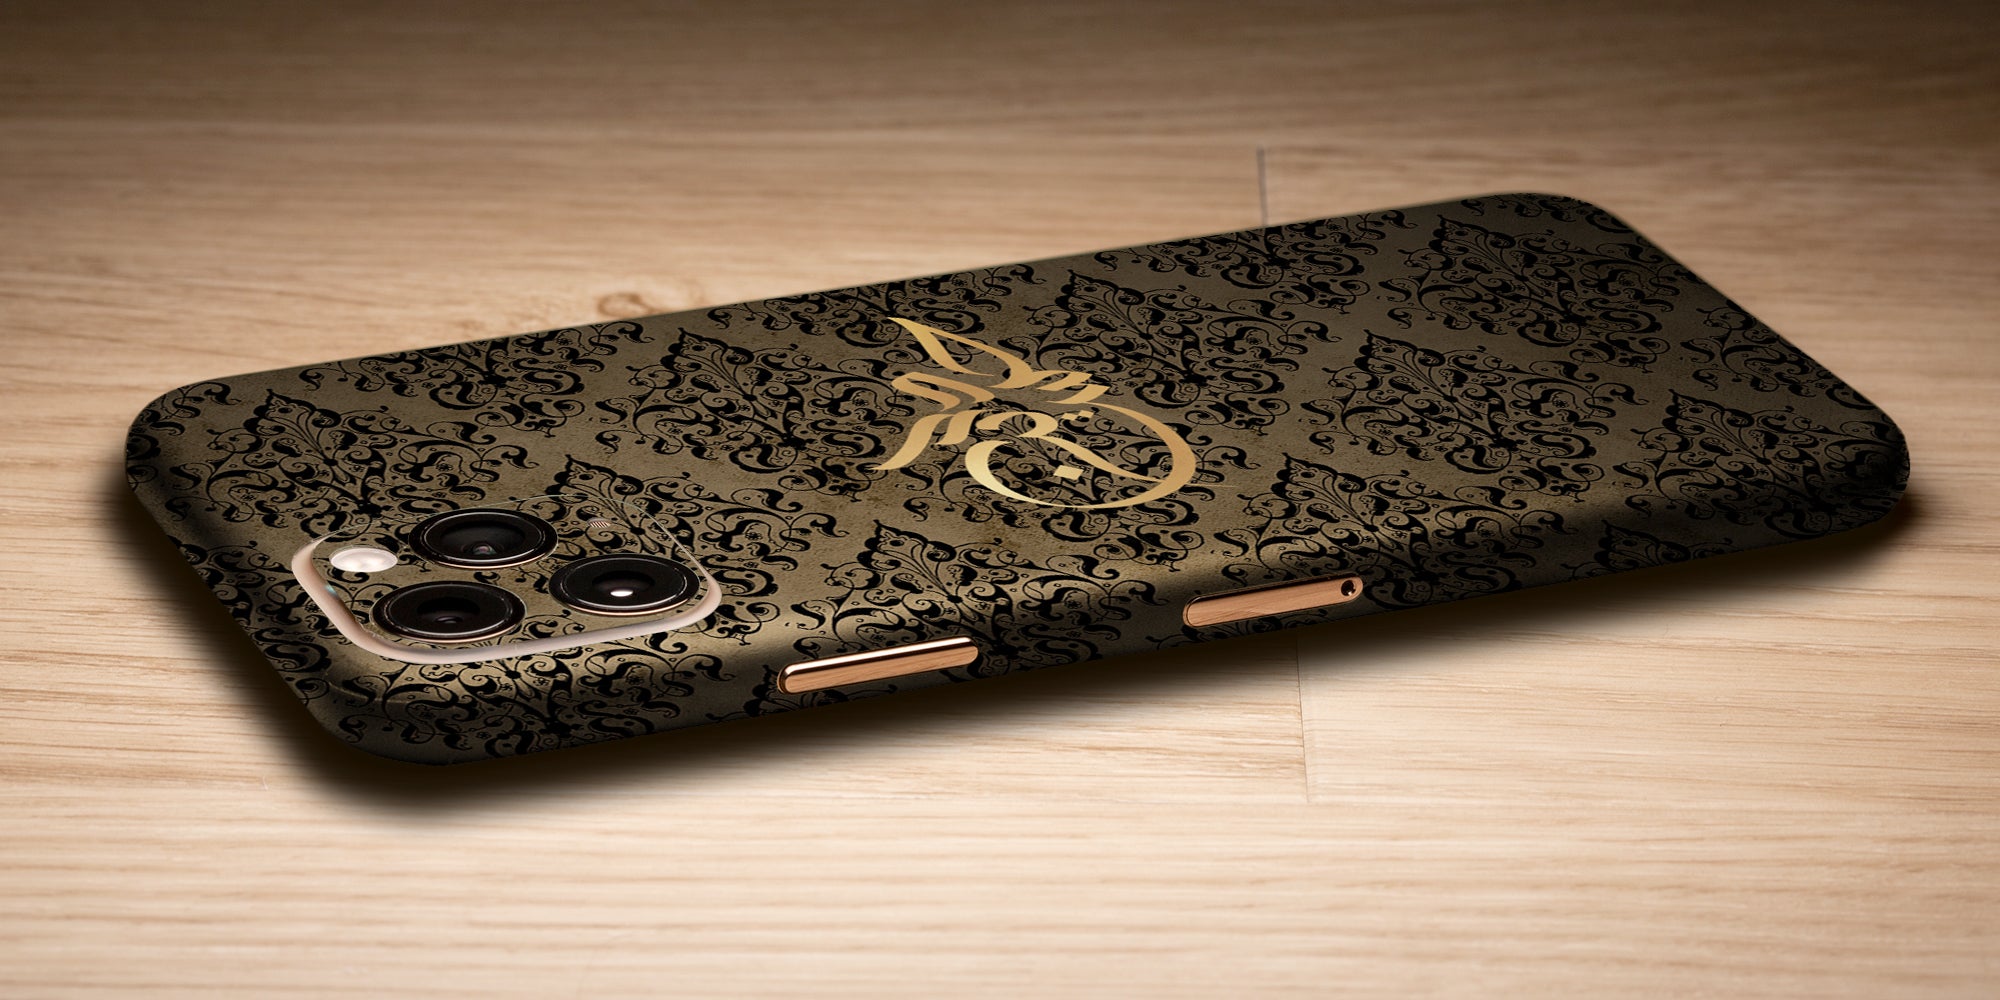 Damask Design Decal Skin With Personalised Arabic Name Phone Wrap - Gold / Black